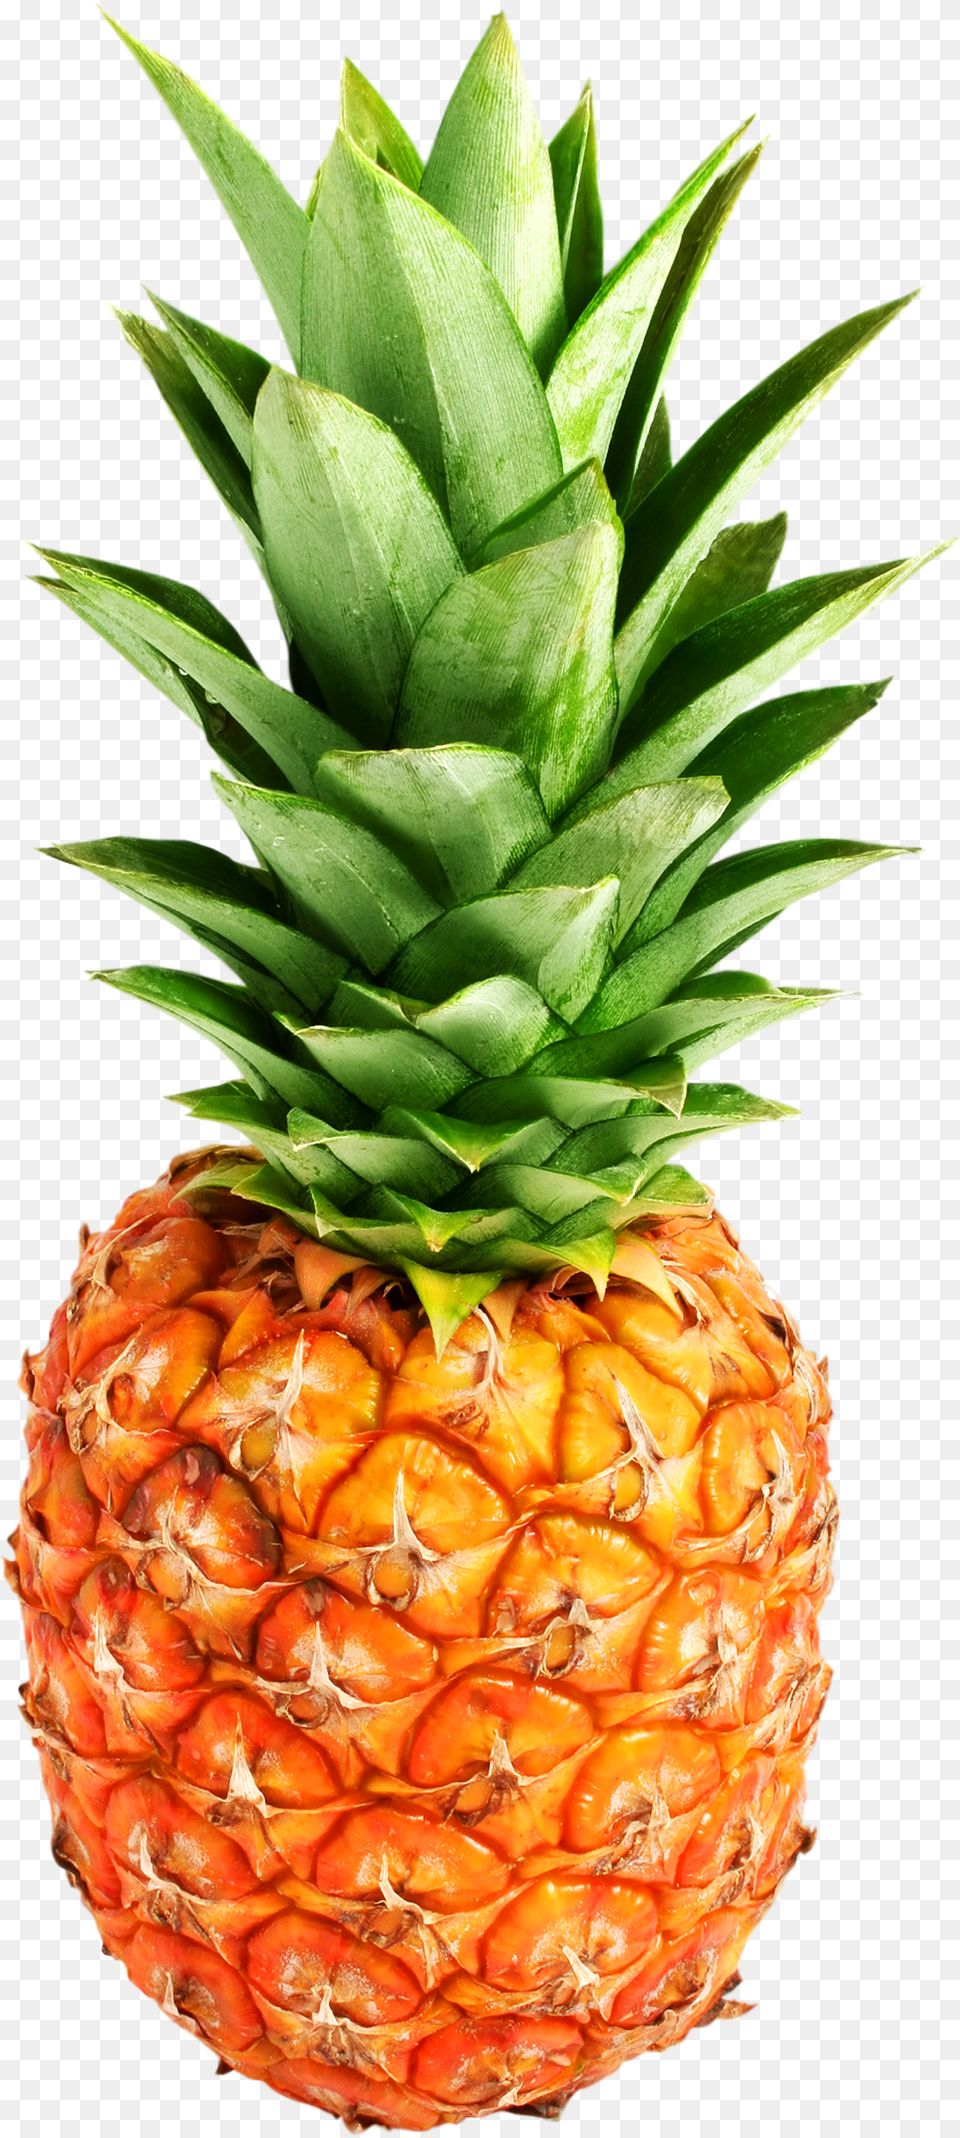 Pineapple Image Pineapple, Food, Fruit, Plant, Produce Free Png